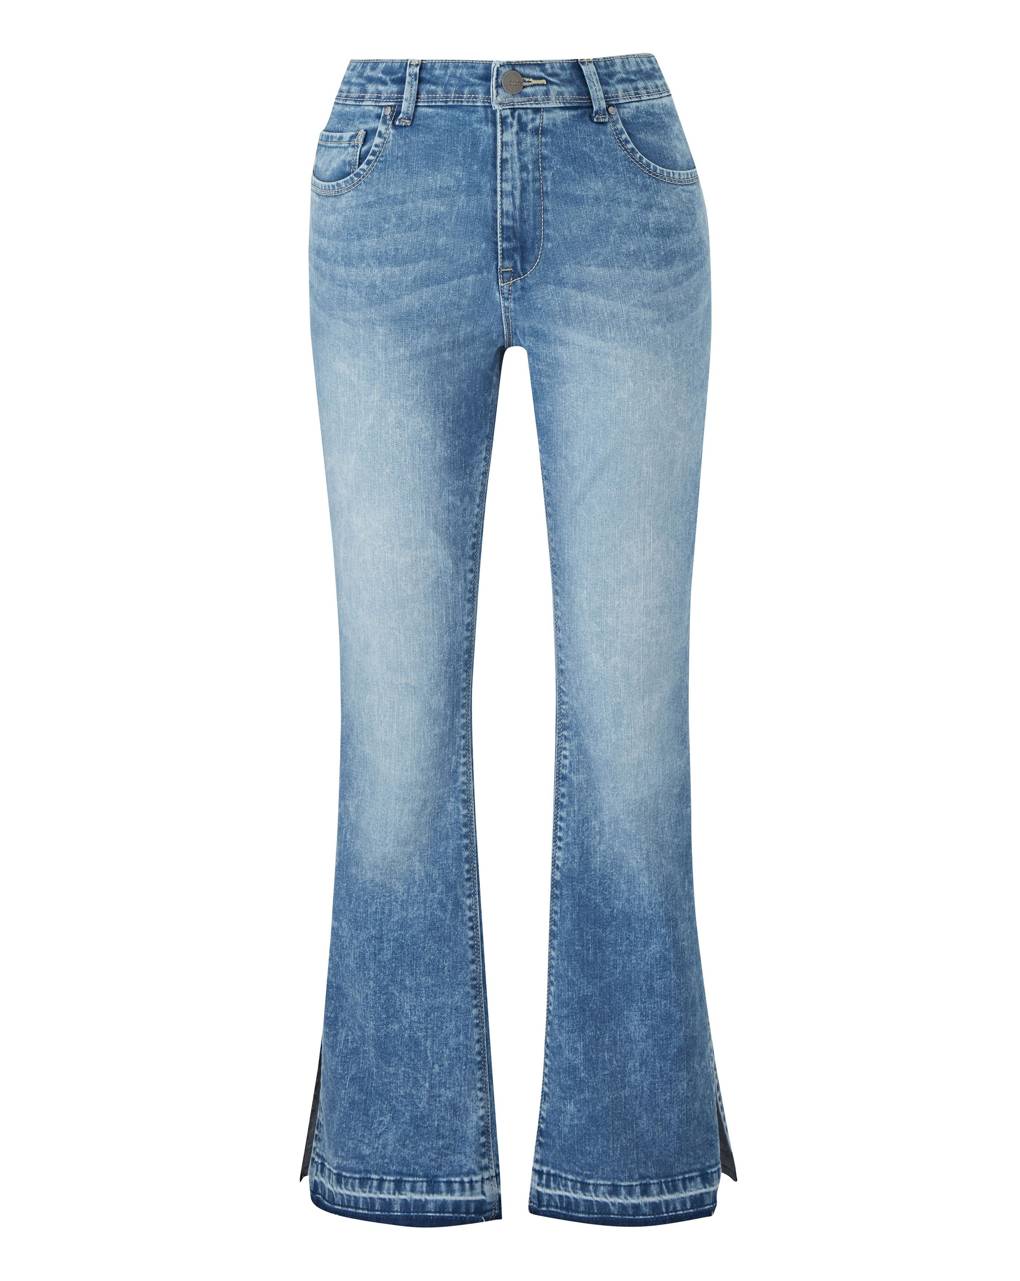 The Denim edit: the styles you need for spring | Glamour UK